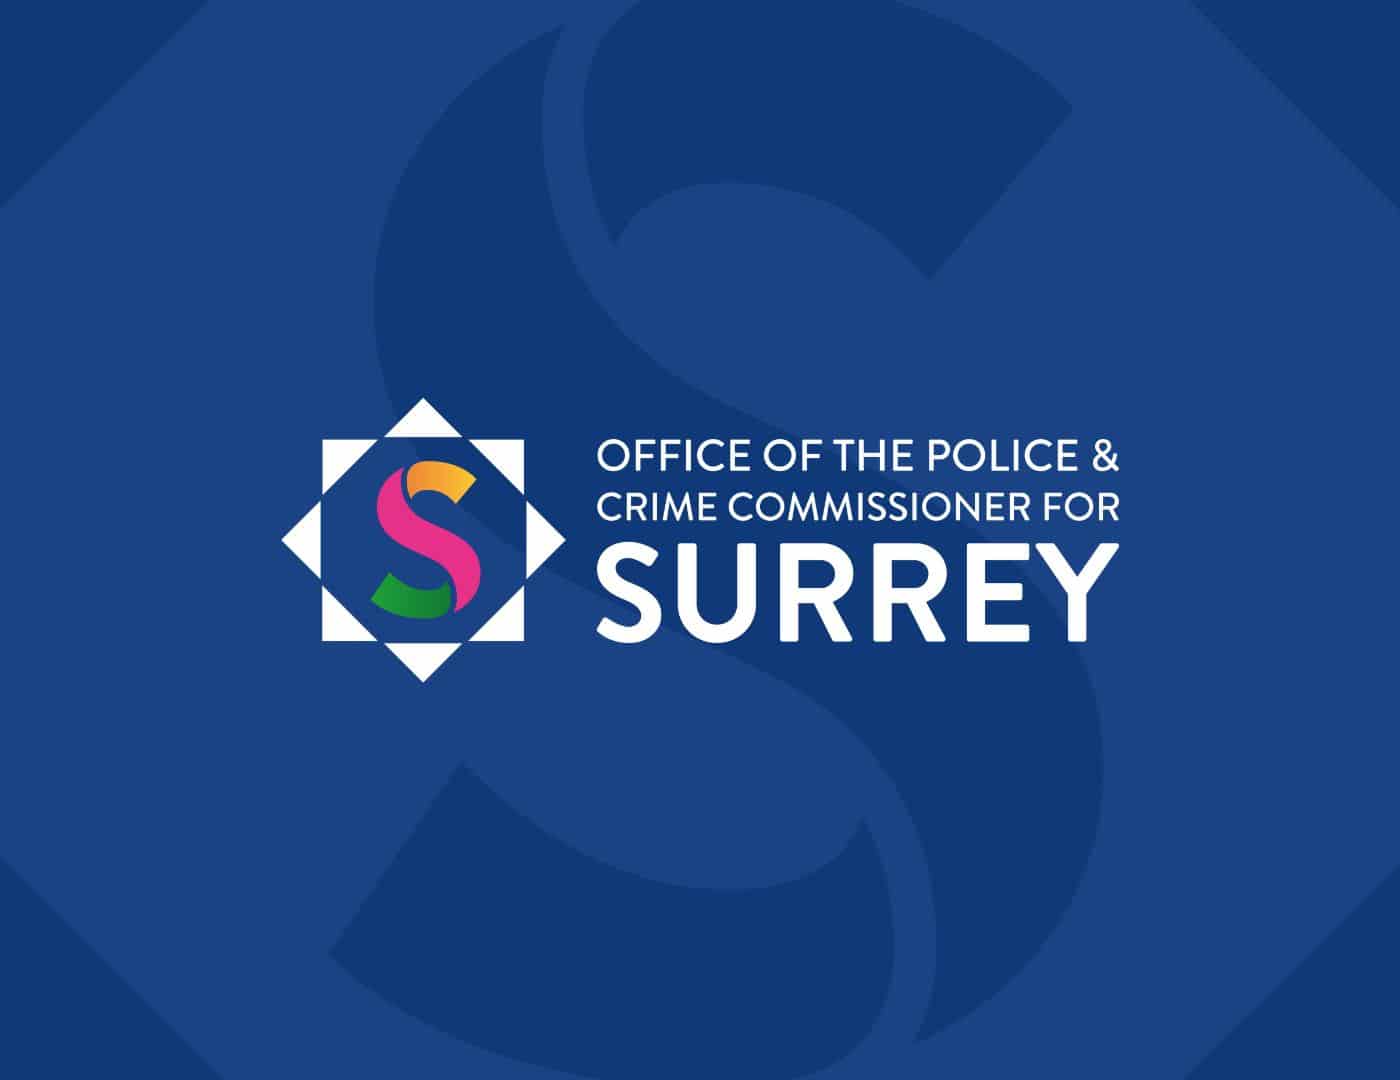 logo of the Office of the Police and Crime Commissioner for Surrey on deep blue background